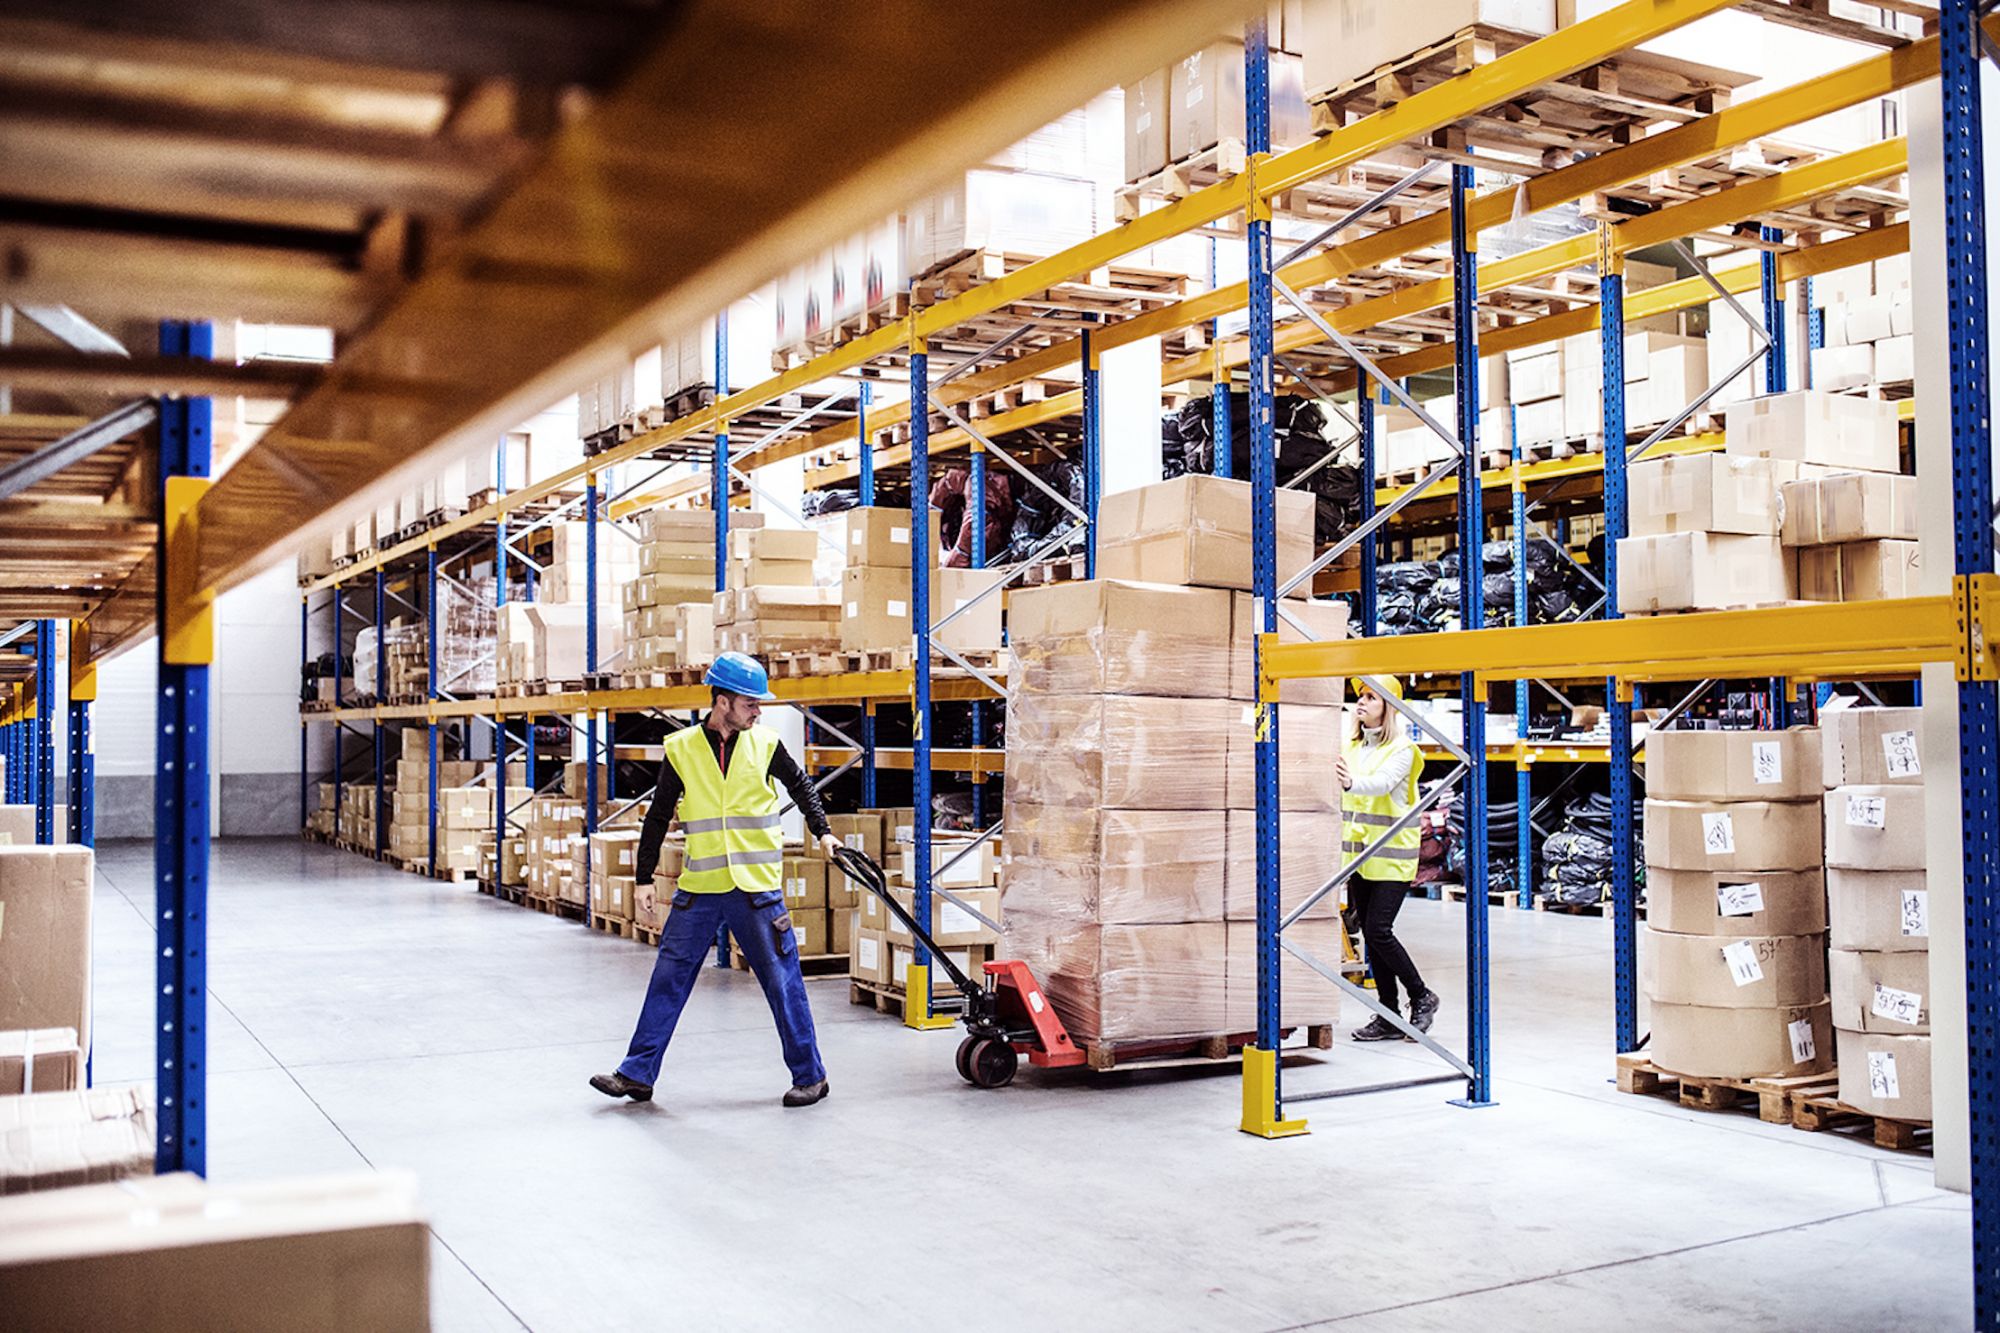 Top 5 Future skills in Demand for Logistics, Warehouse & Transport Managers